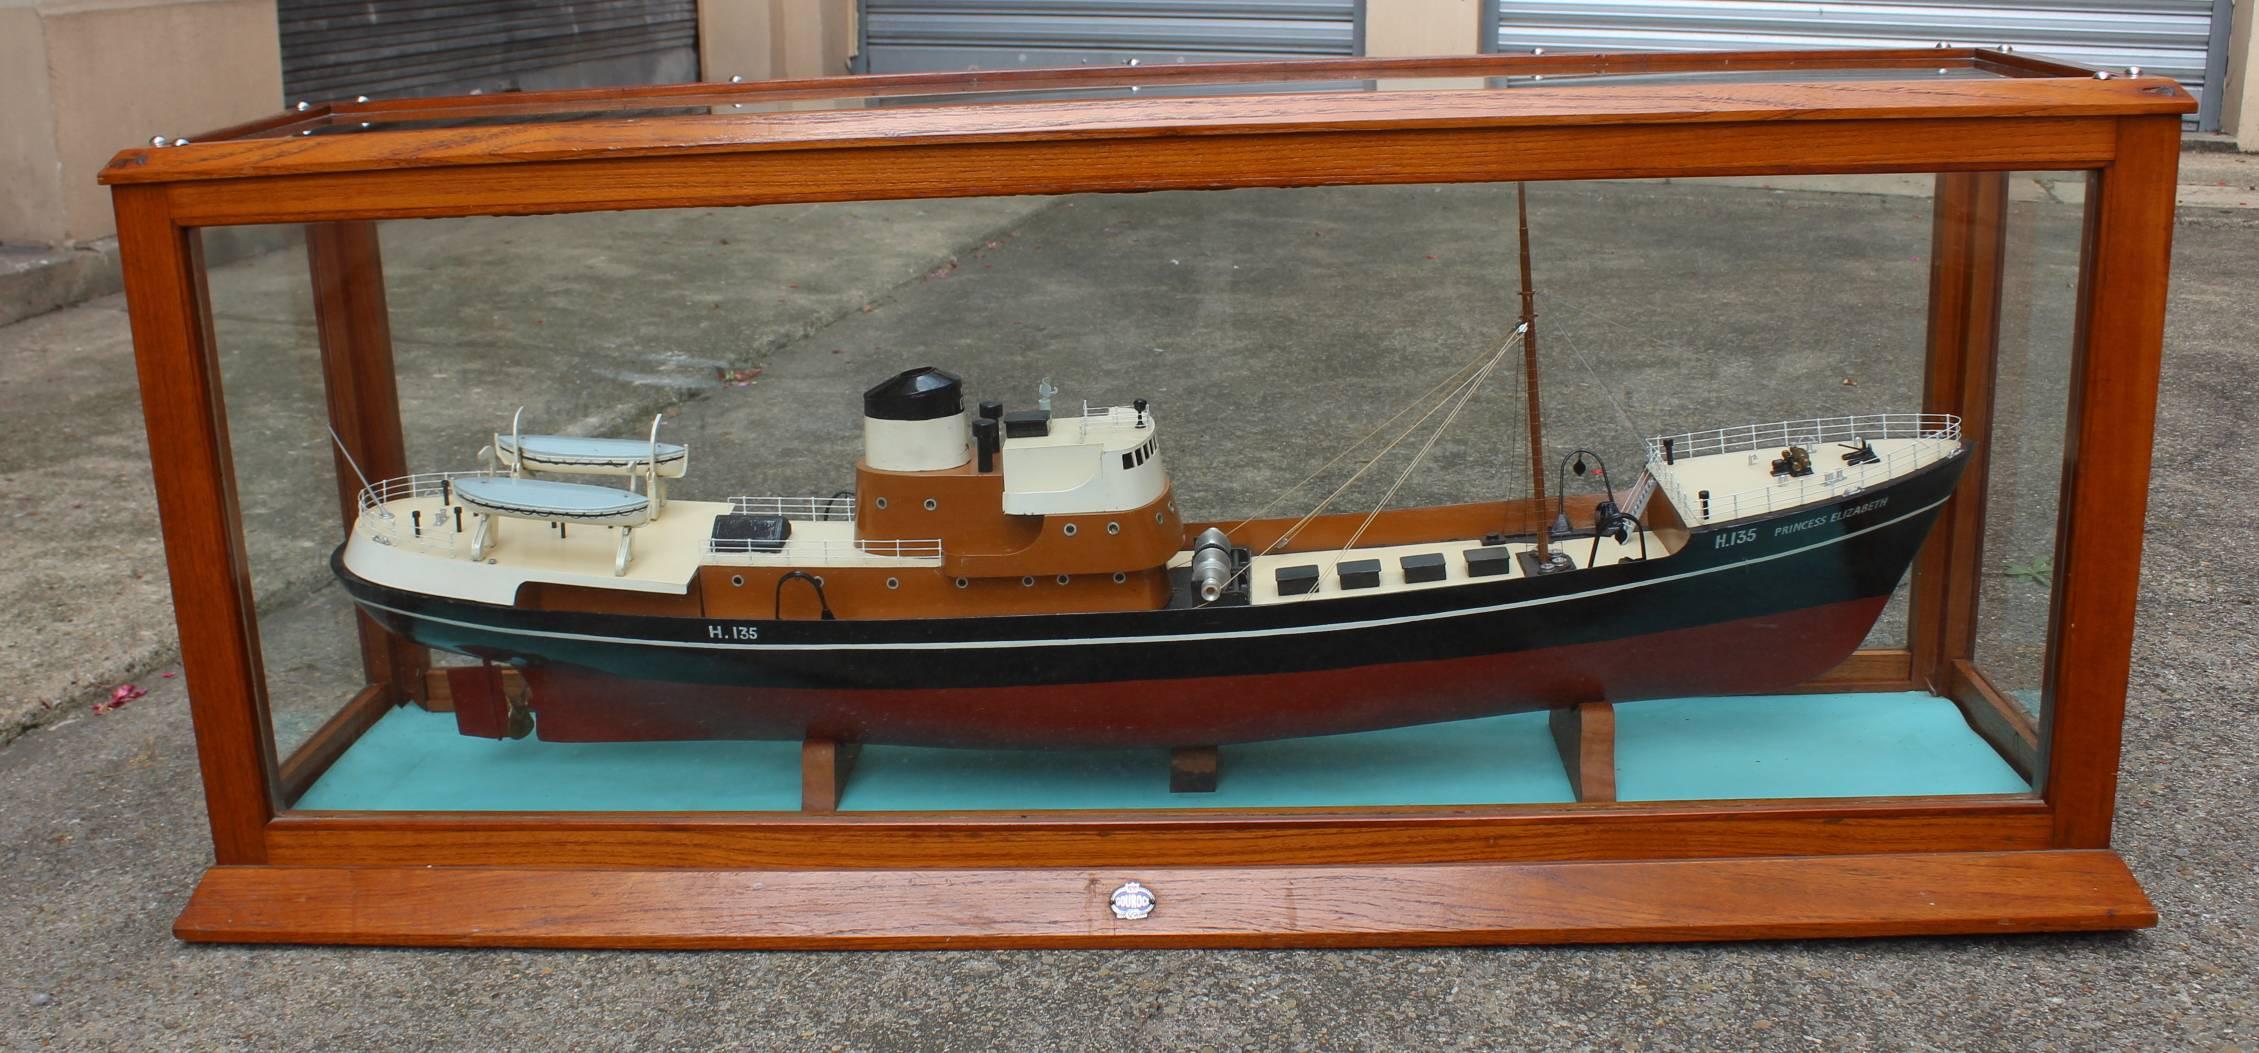 Huge model of the Princess Elisabeth Boat marked Gourock on display, in excellent condition.